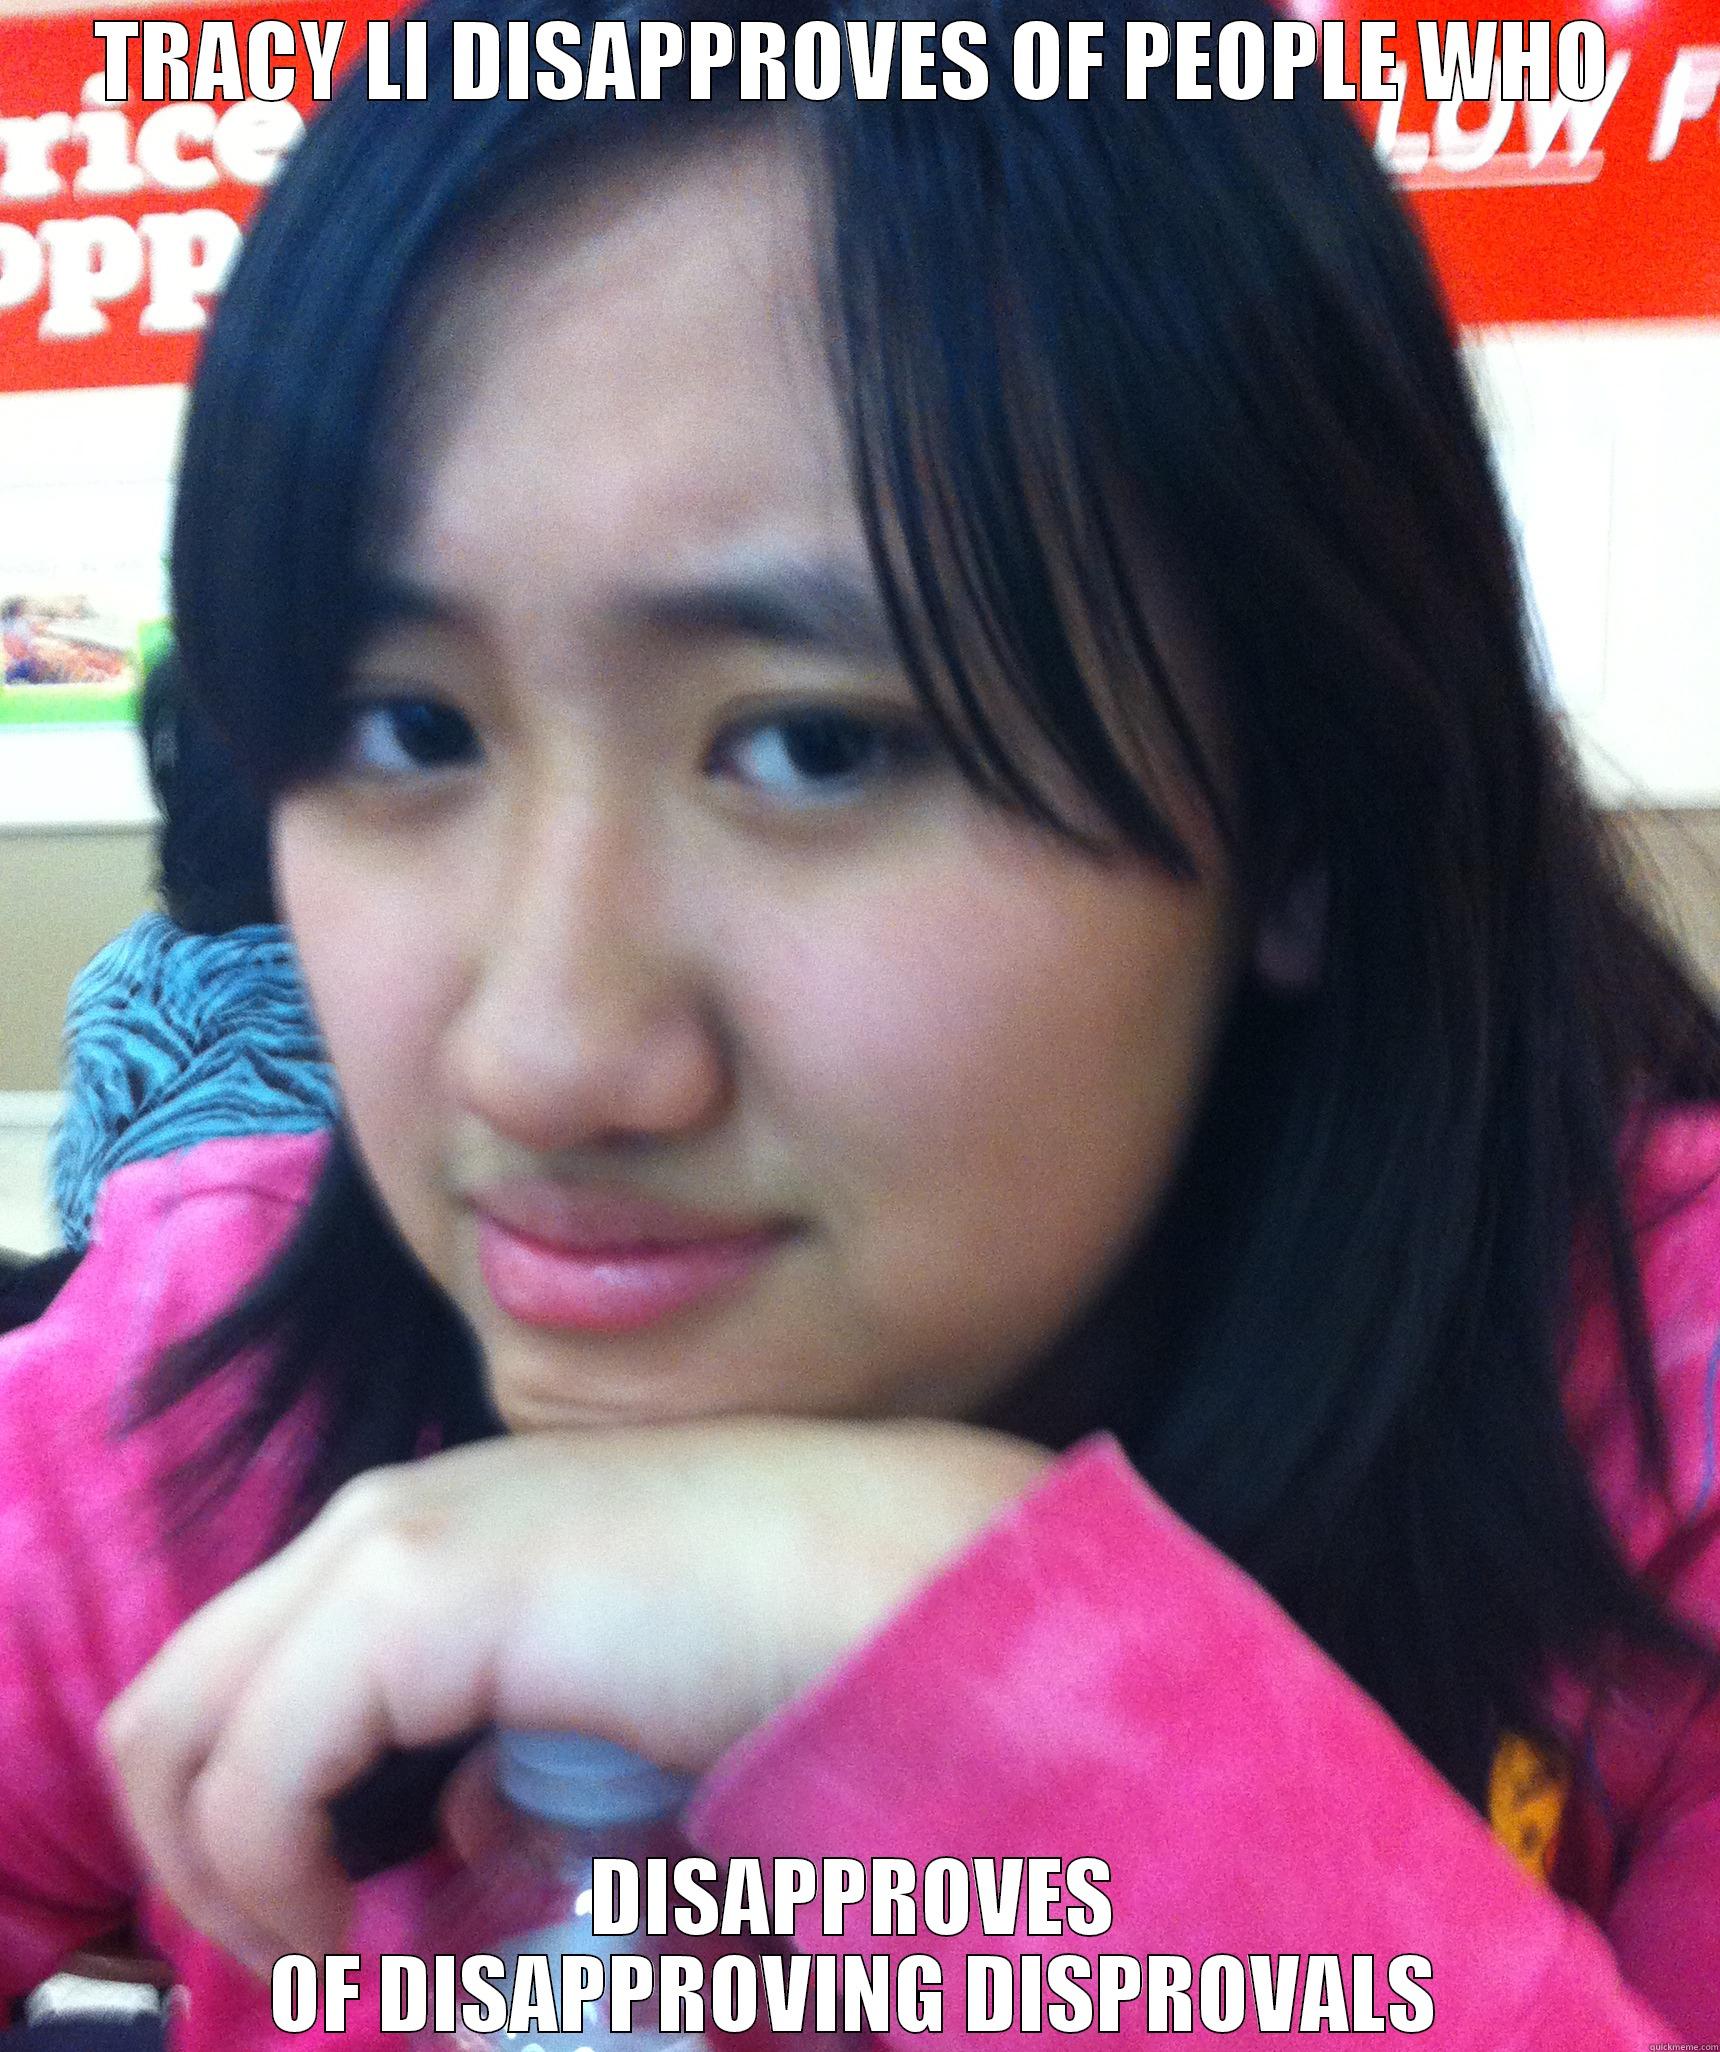 Tracy Disapproves! - TRACY LI DISAPPROVES OF PEOPLE WHO DISAPPROVES OF DISAPPROVING DISPROVALS Misc